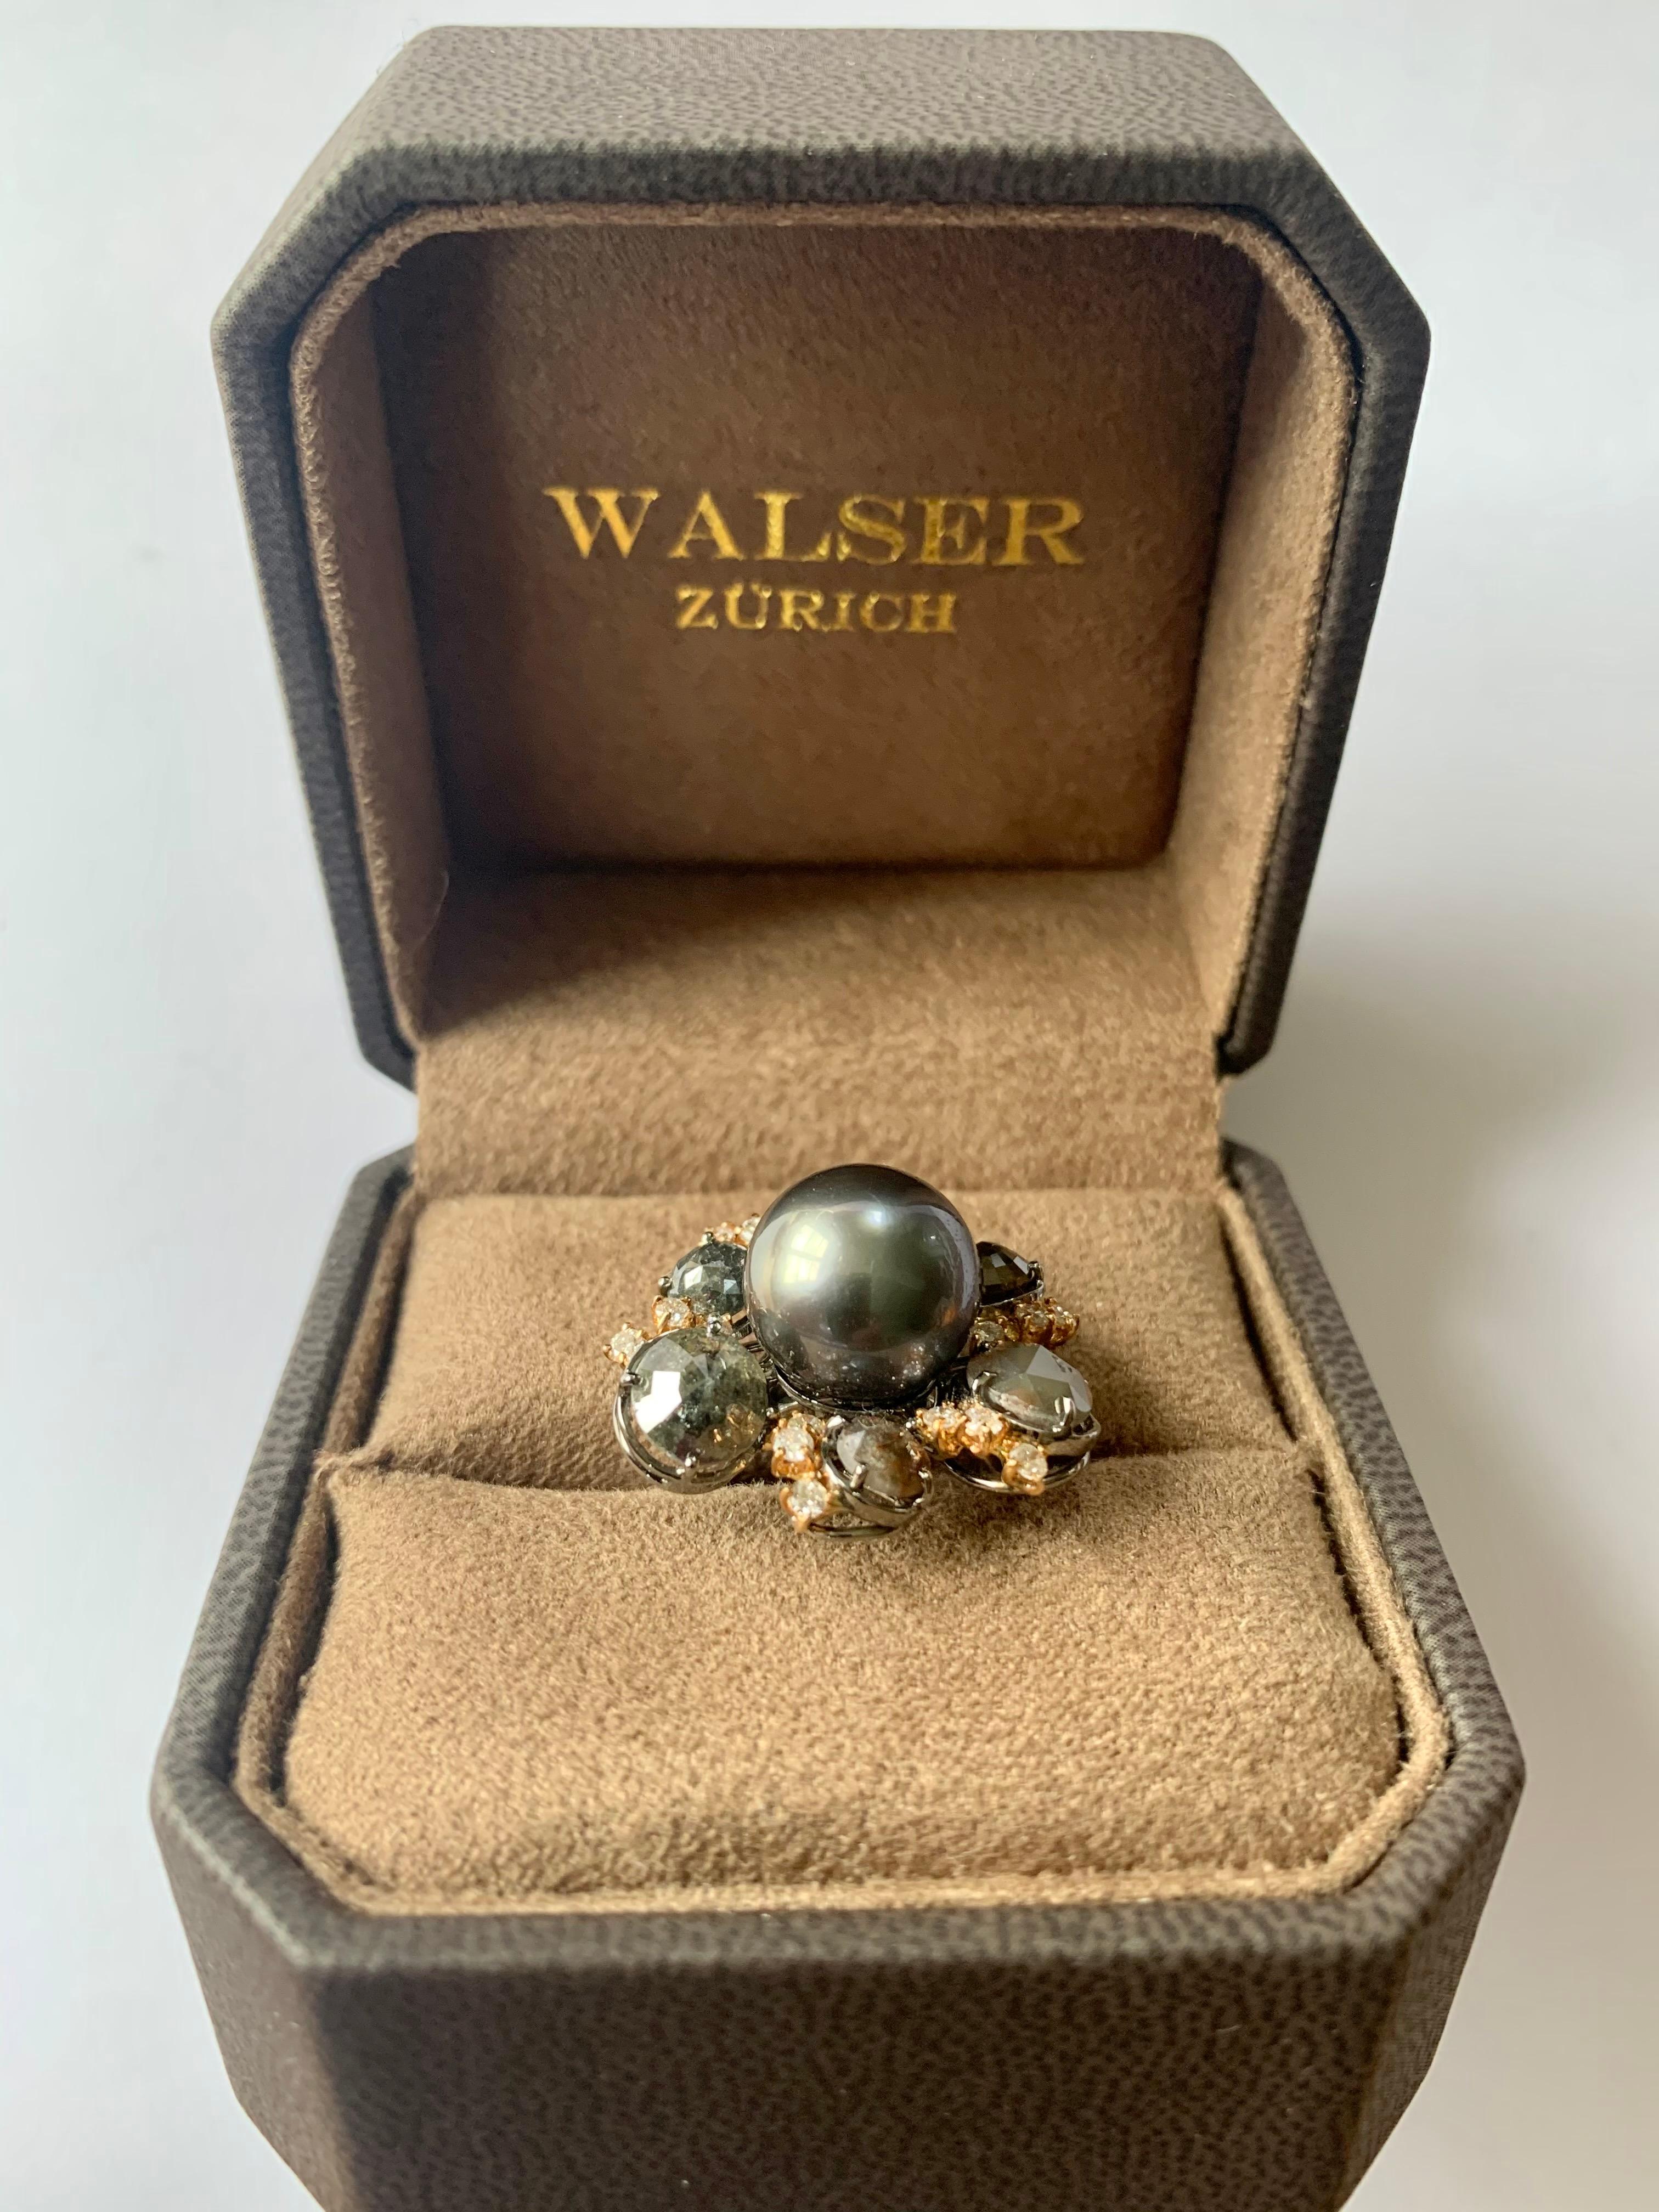 Very unusual 18 K blackened white Gold and pink Gold Ring featuring 1 silvery Tahitian Pearl (12.2 mm). The cultured Pearl is accentuated by 6 rough Diamonds with a weight of 5.45 ct and 18 Brilliant cut Diamonds weighing 0.50 ct. 
The ring is